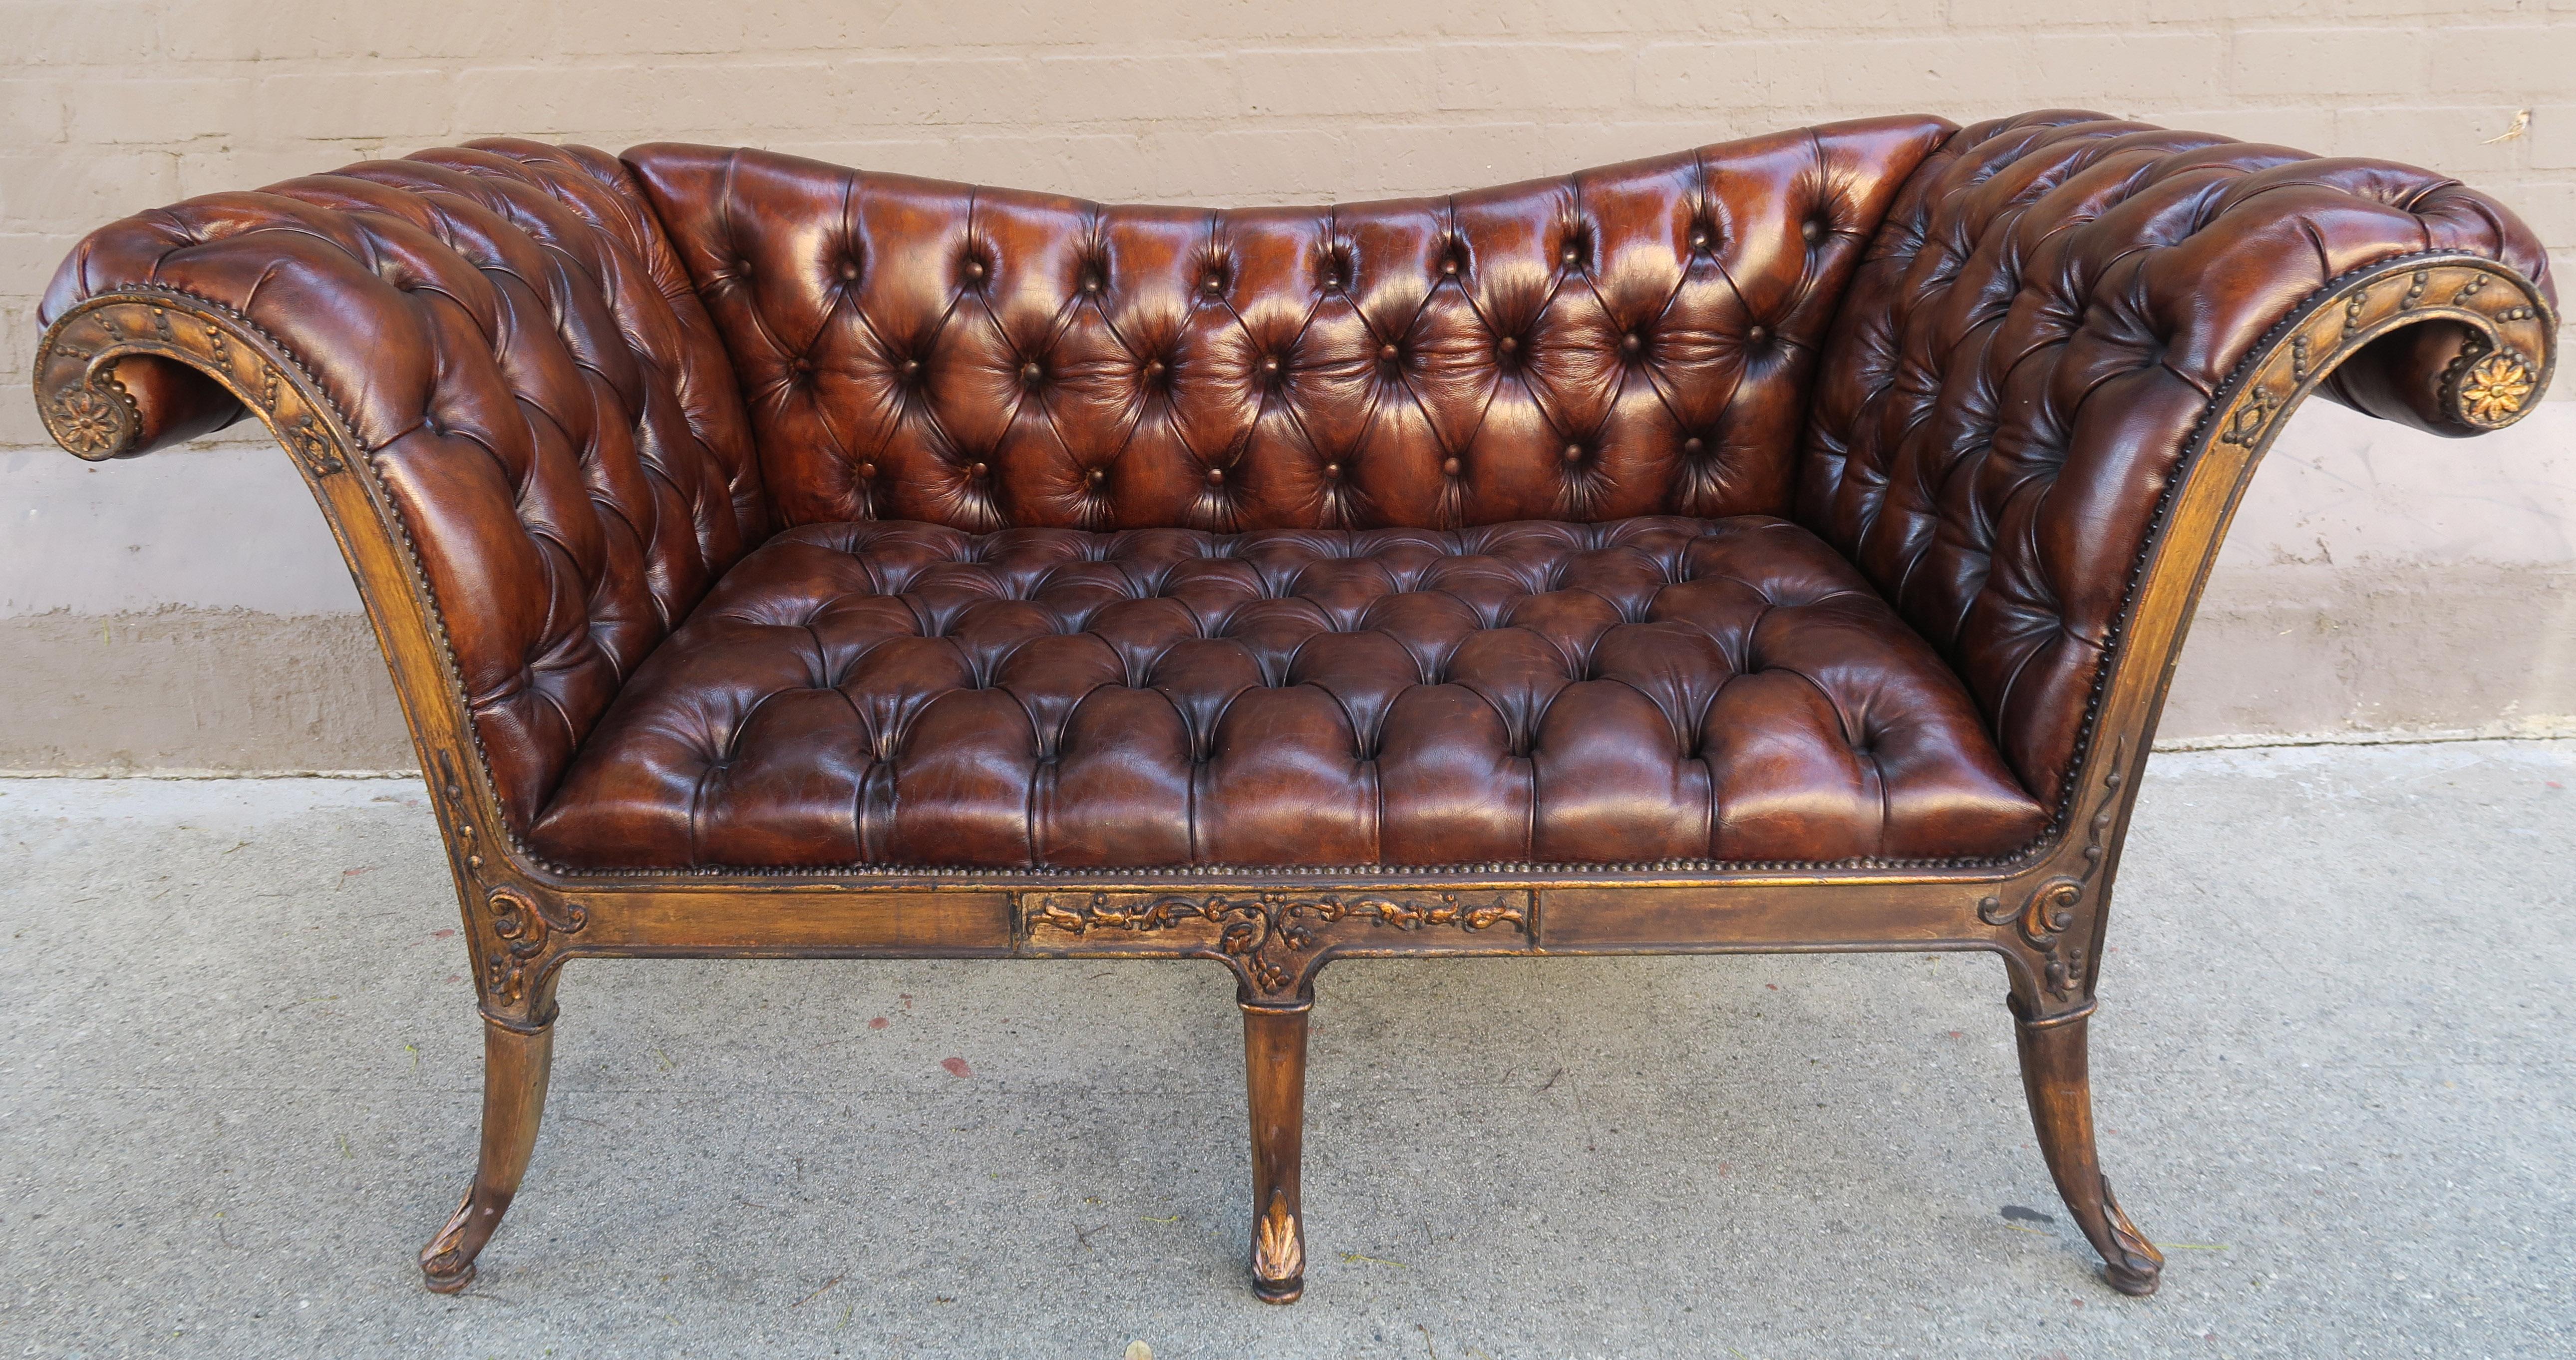 French Regency style carved wood sofa upholstered in tufted beautifully distressed leather and detailed with nailheads. The sofa is finely carved and has parcel gilt detailing. 
Measures: Seat height 18